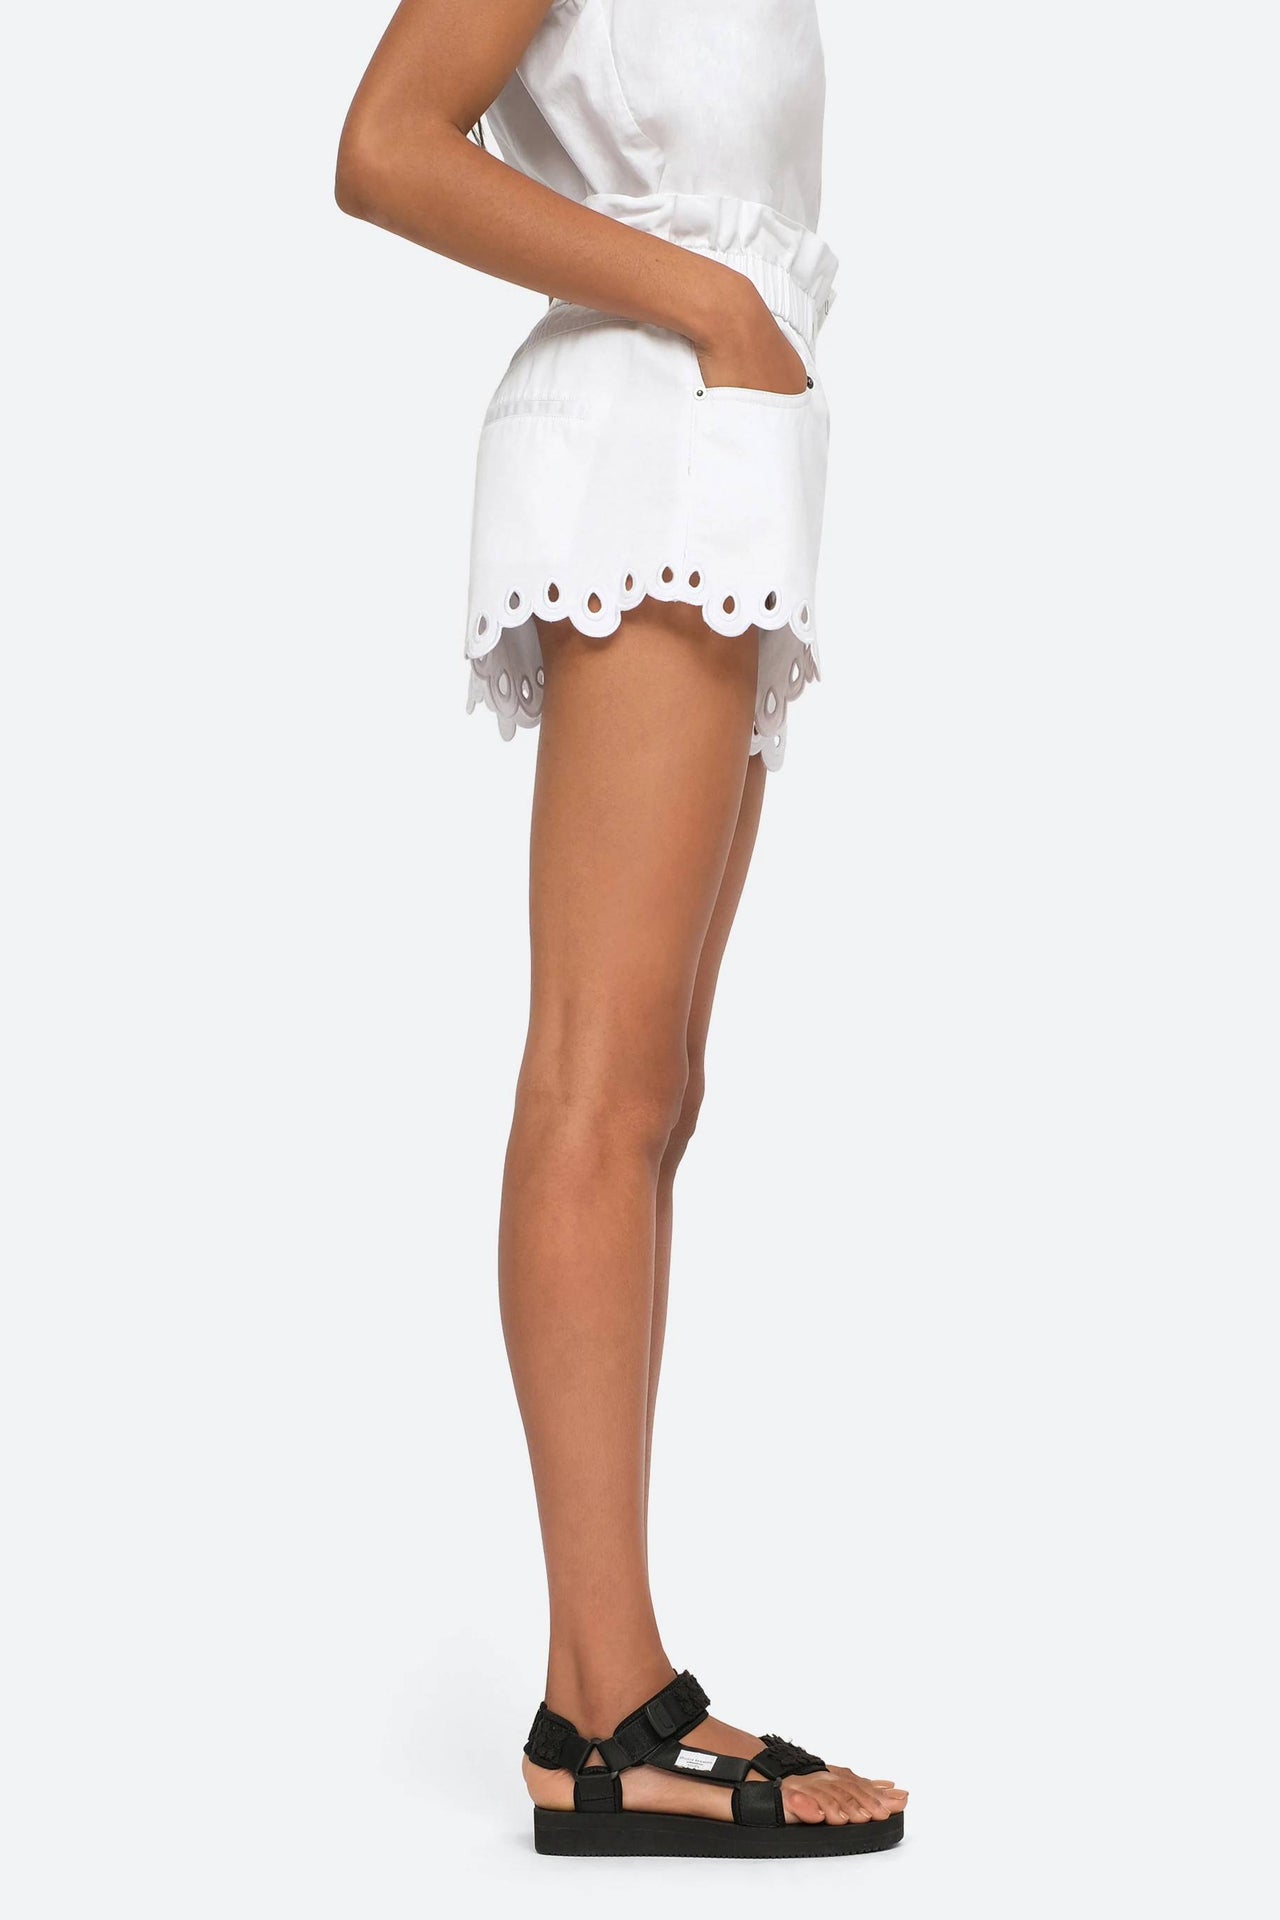 Lee Embroidery Short in White-Short-Sea New York-Debs Boutique